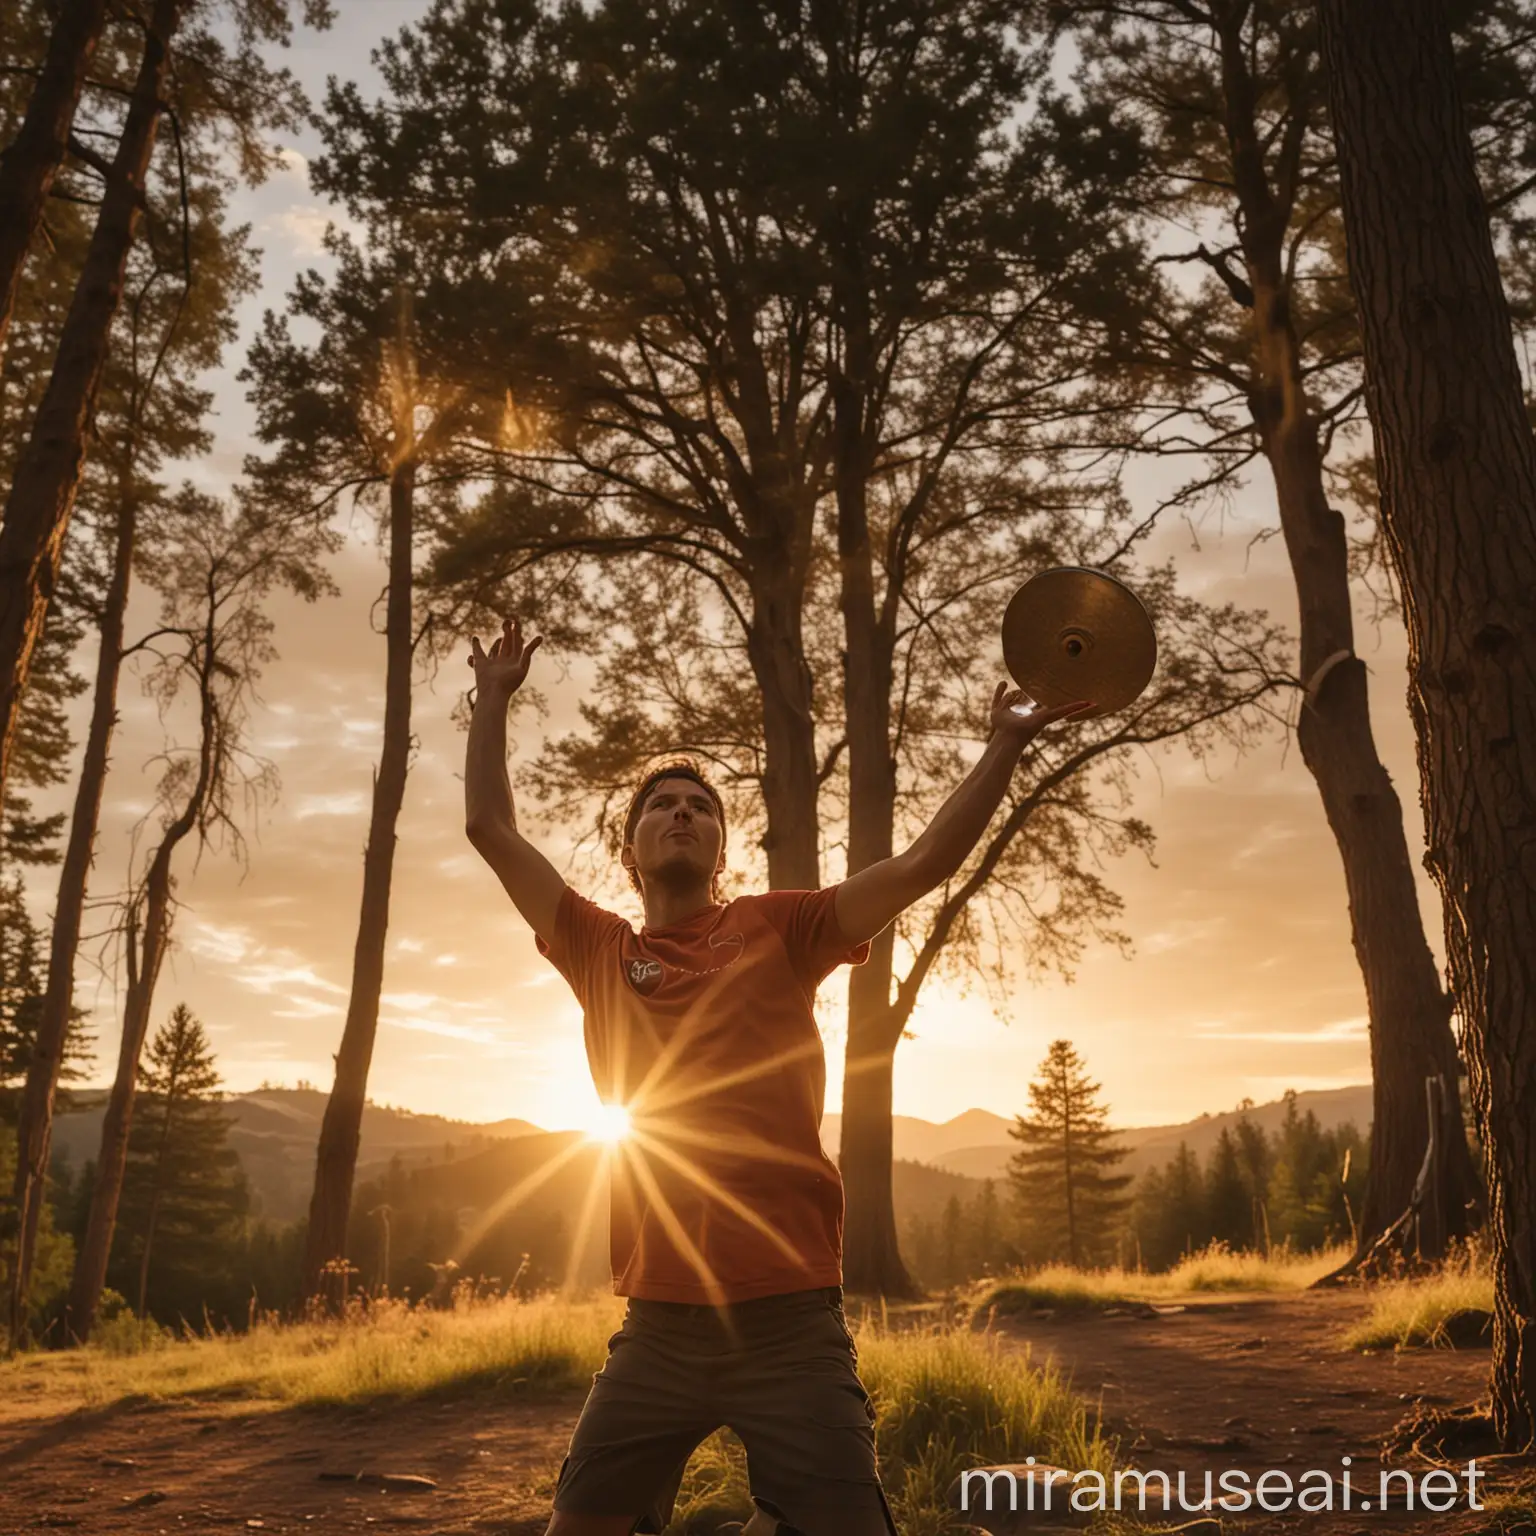 A dramatic and epic scene of a disc golf player mid-throw, captured in the moment of intense focus and power, with the player's face clearly visible, showing determination and concentration. The scene is set in a majestic landscape with towering ancient trees, rolling hills, and a stunning sunset casting a golden glow across the sky. The disc is flying through the air with trails of light, creating a sense of motion and energy. The atmosphere is electrifying, with a sense of adventure and triumph. It's a close up on the player and the face is visible